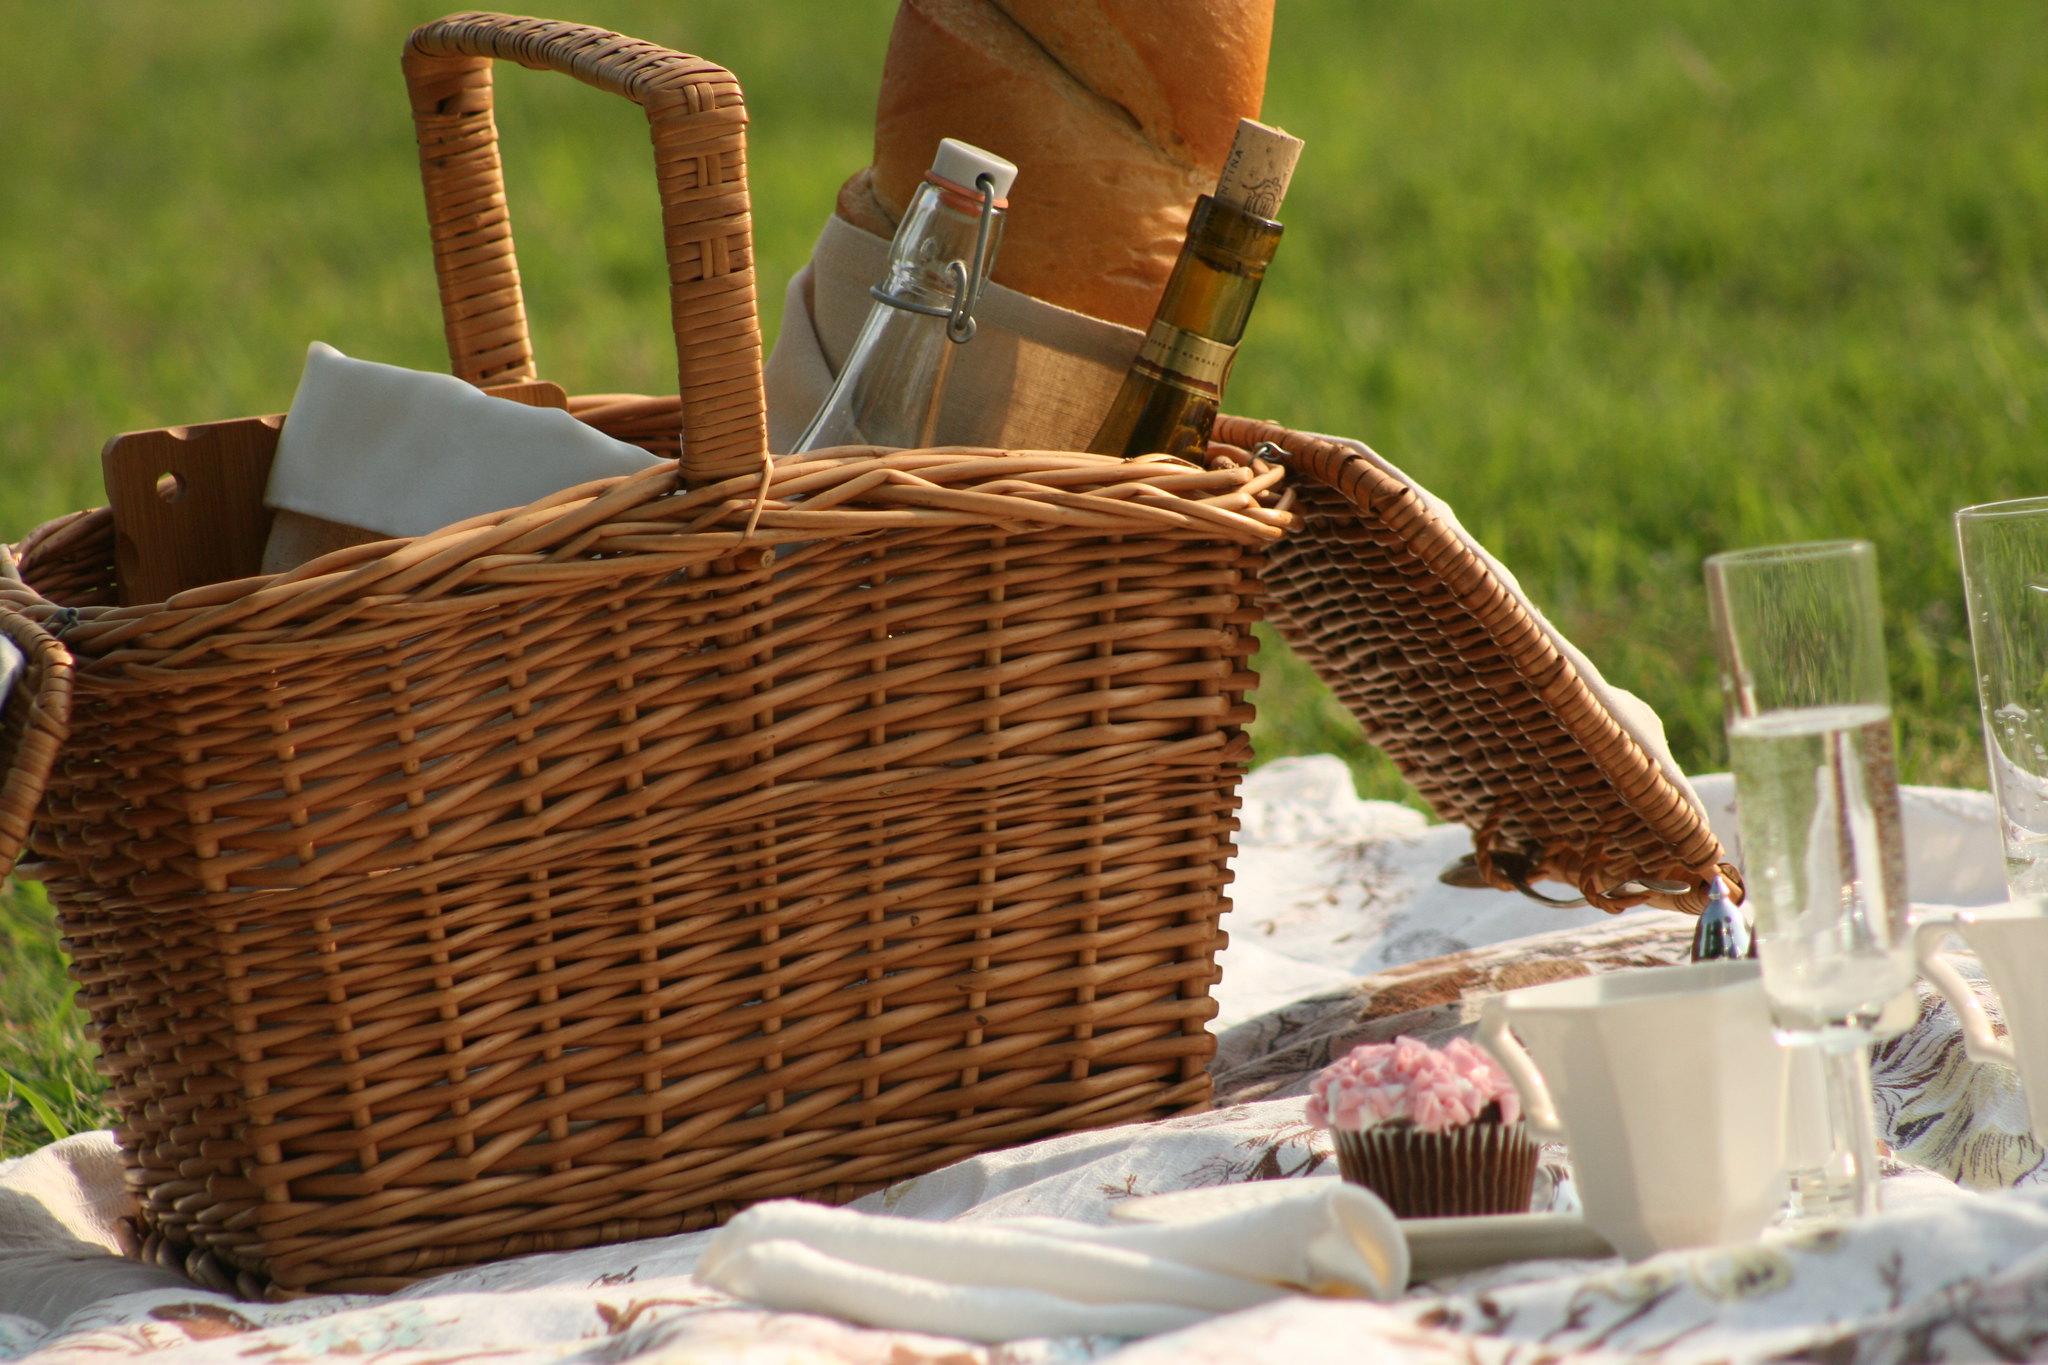 Picnic basket and champagne flutes on a blanket in grass